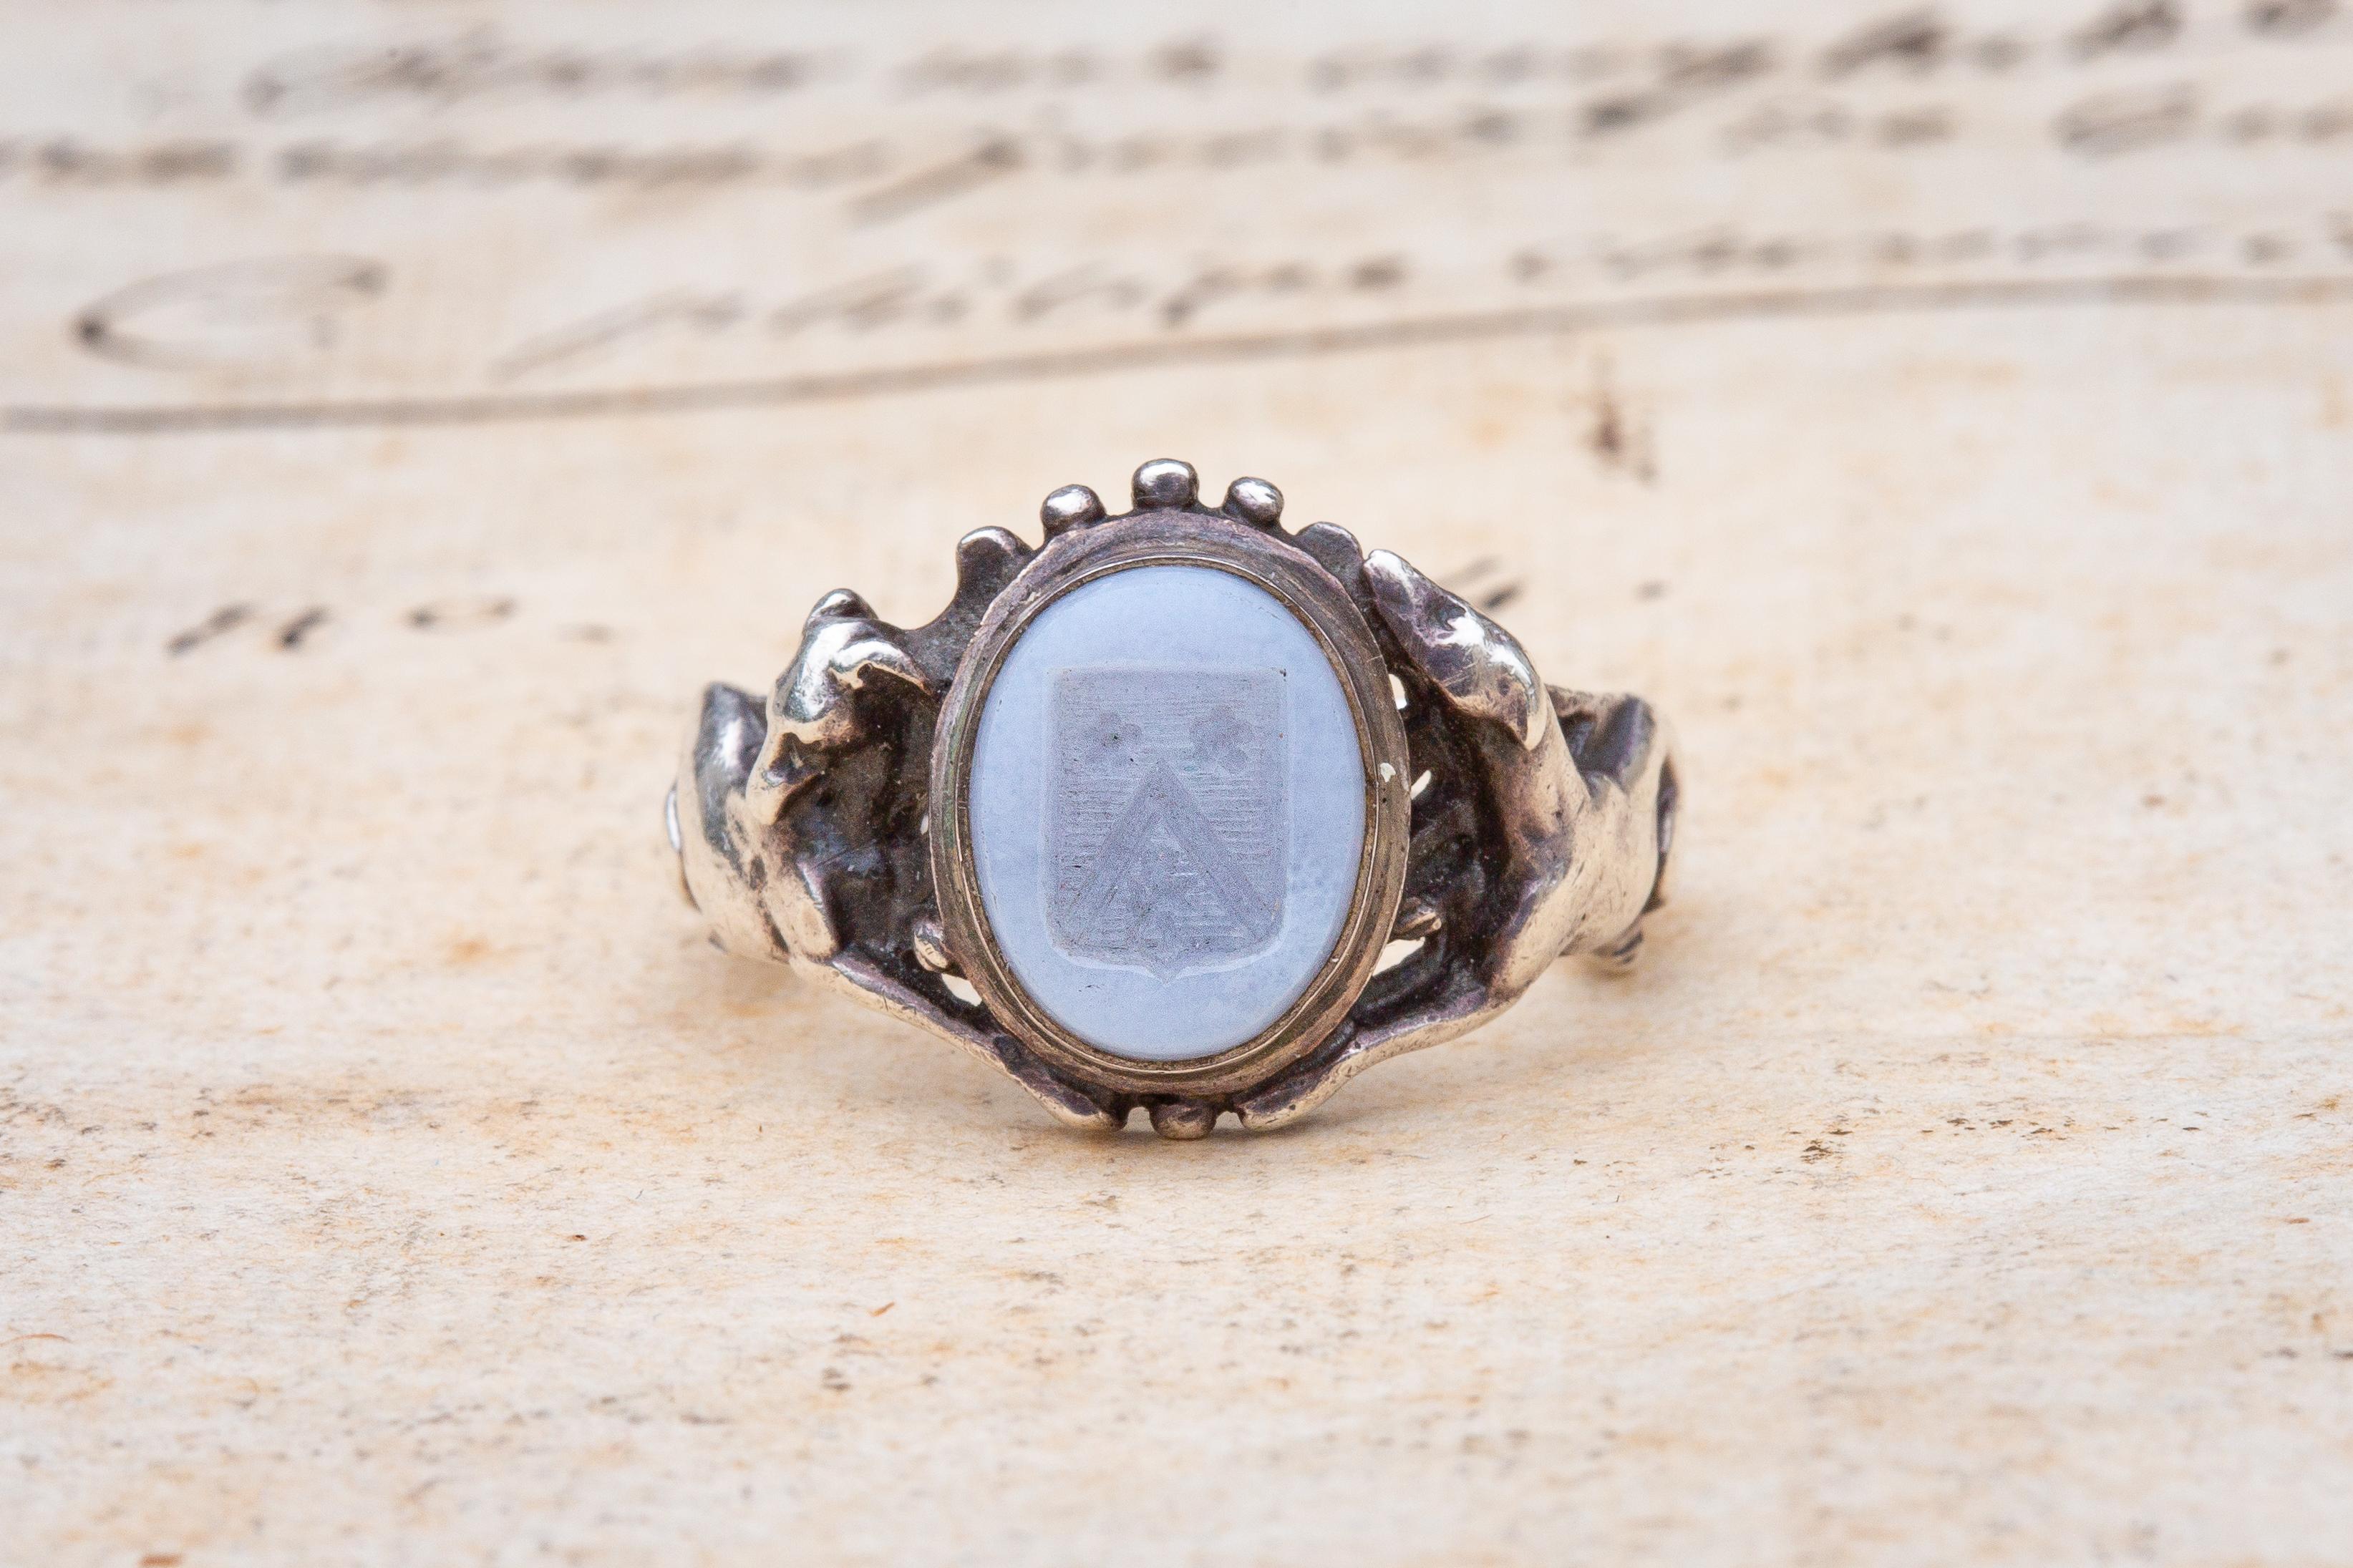 French Neo-Renaissance Intaglio Signet Ring Manner of Wièse & Froment-Meurice For Sale 5